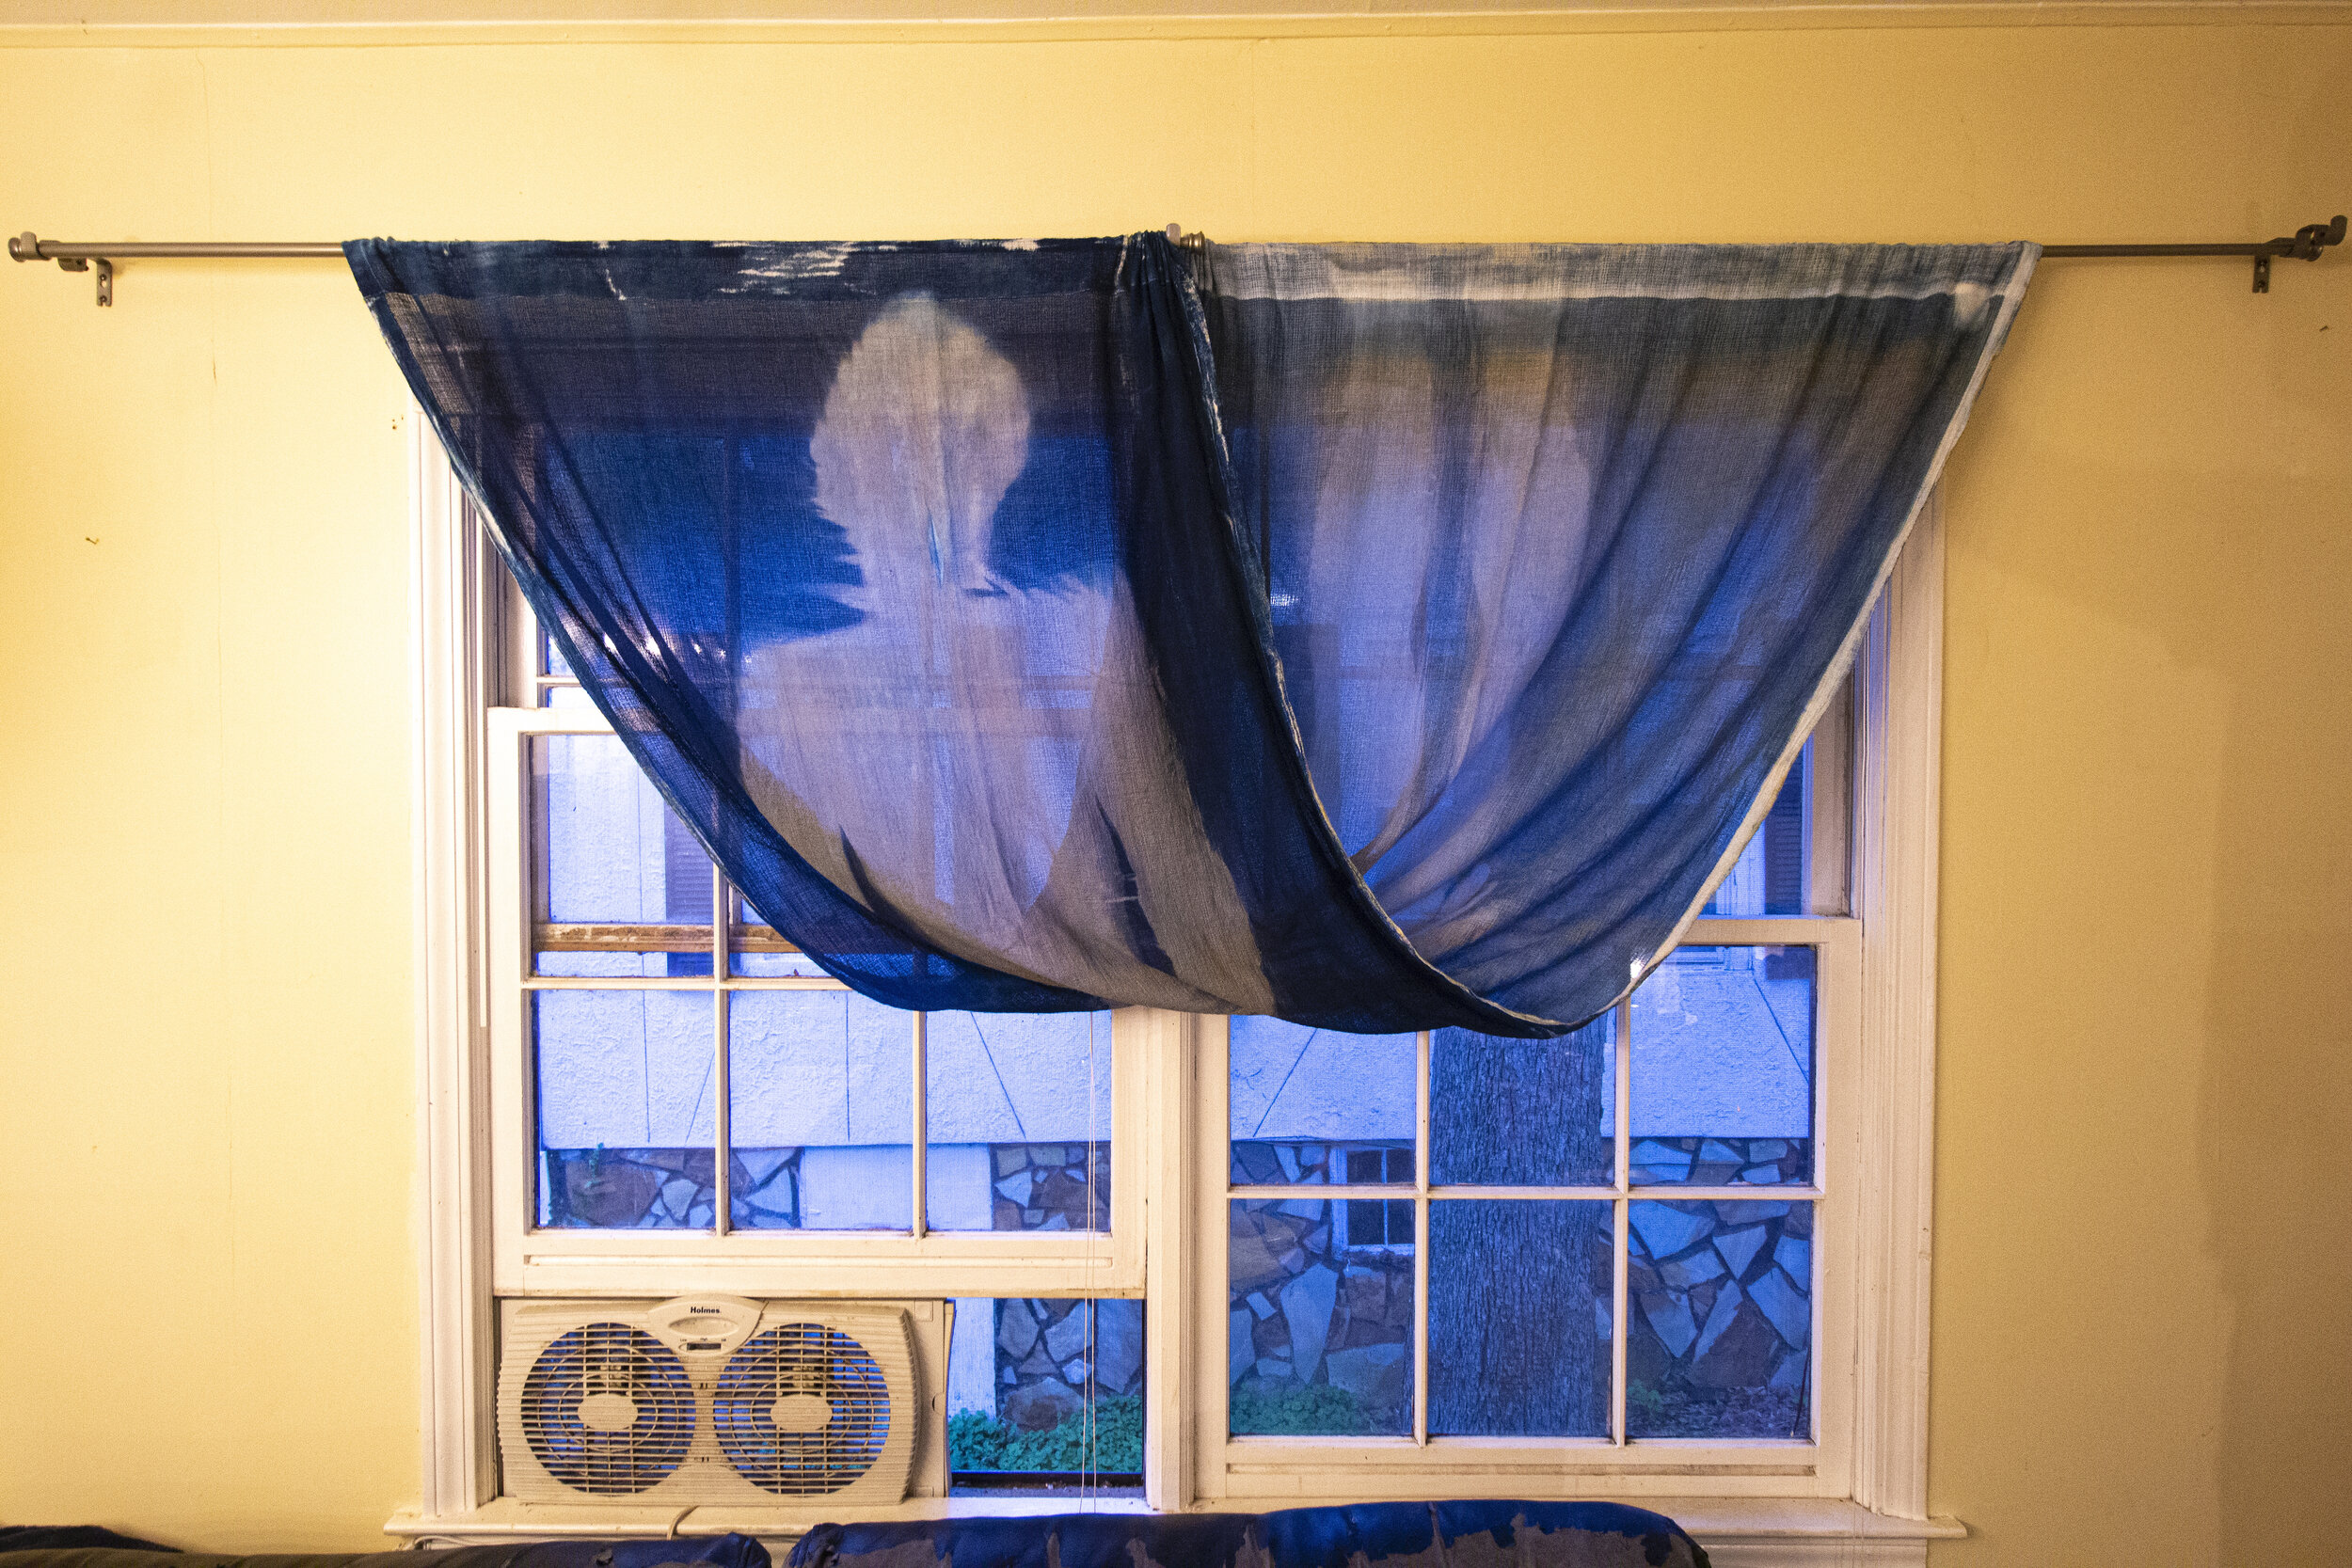 Half Twist [early evening], 2020, cotton curtain, cyanotype solution, curtain rod, and hardware, 110 x 42 inches